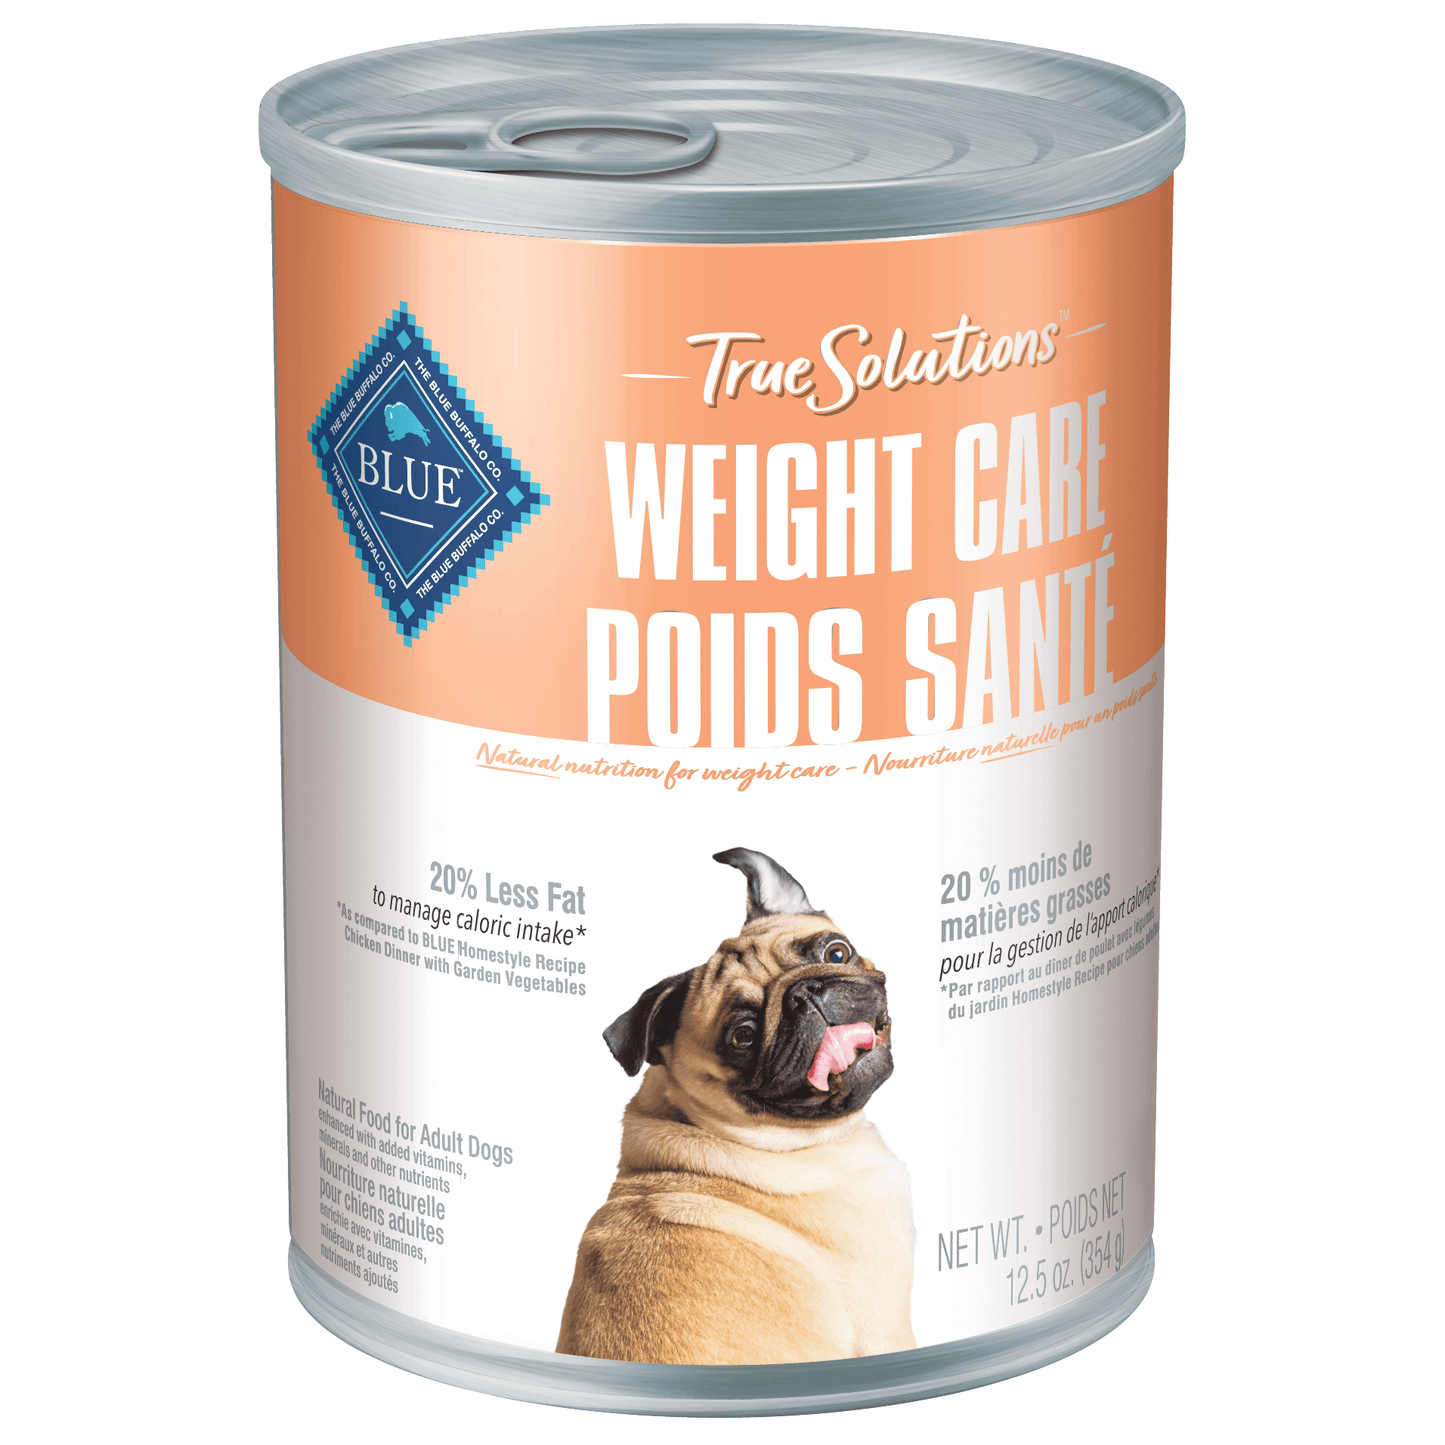 Blue True Solutions Canned Dog Food Weight Care 354g Canned Dog Food 354g | PetMax Canada